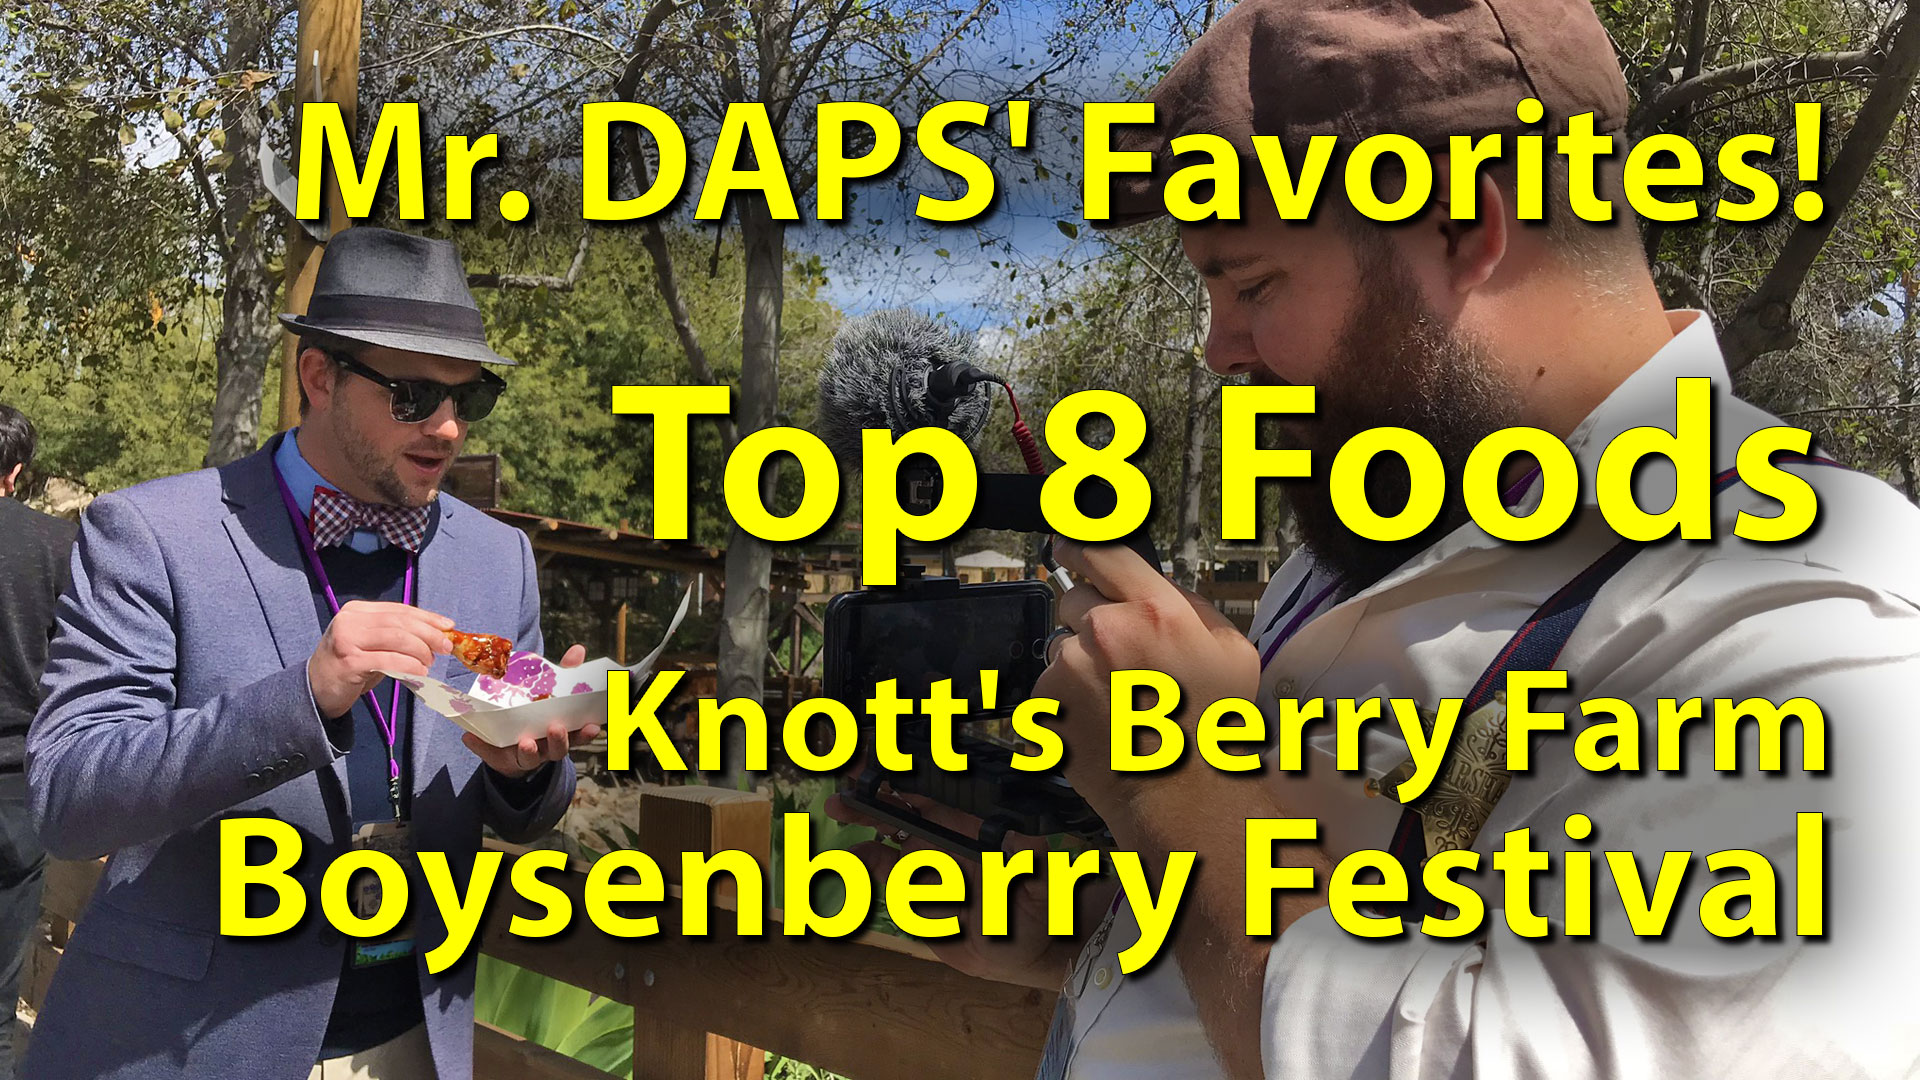 Mr. DAPS' Favorites! - The Top 8 Foods at the Knott's Berry Farm Boysenberry Festival